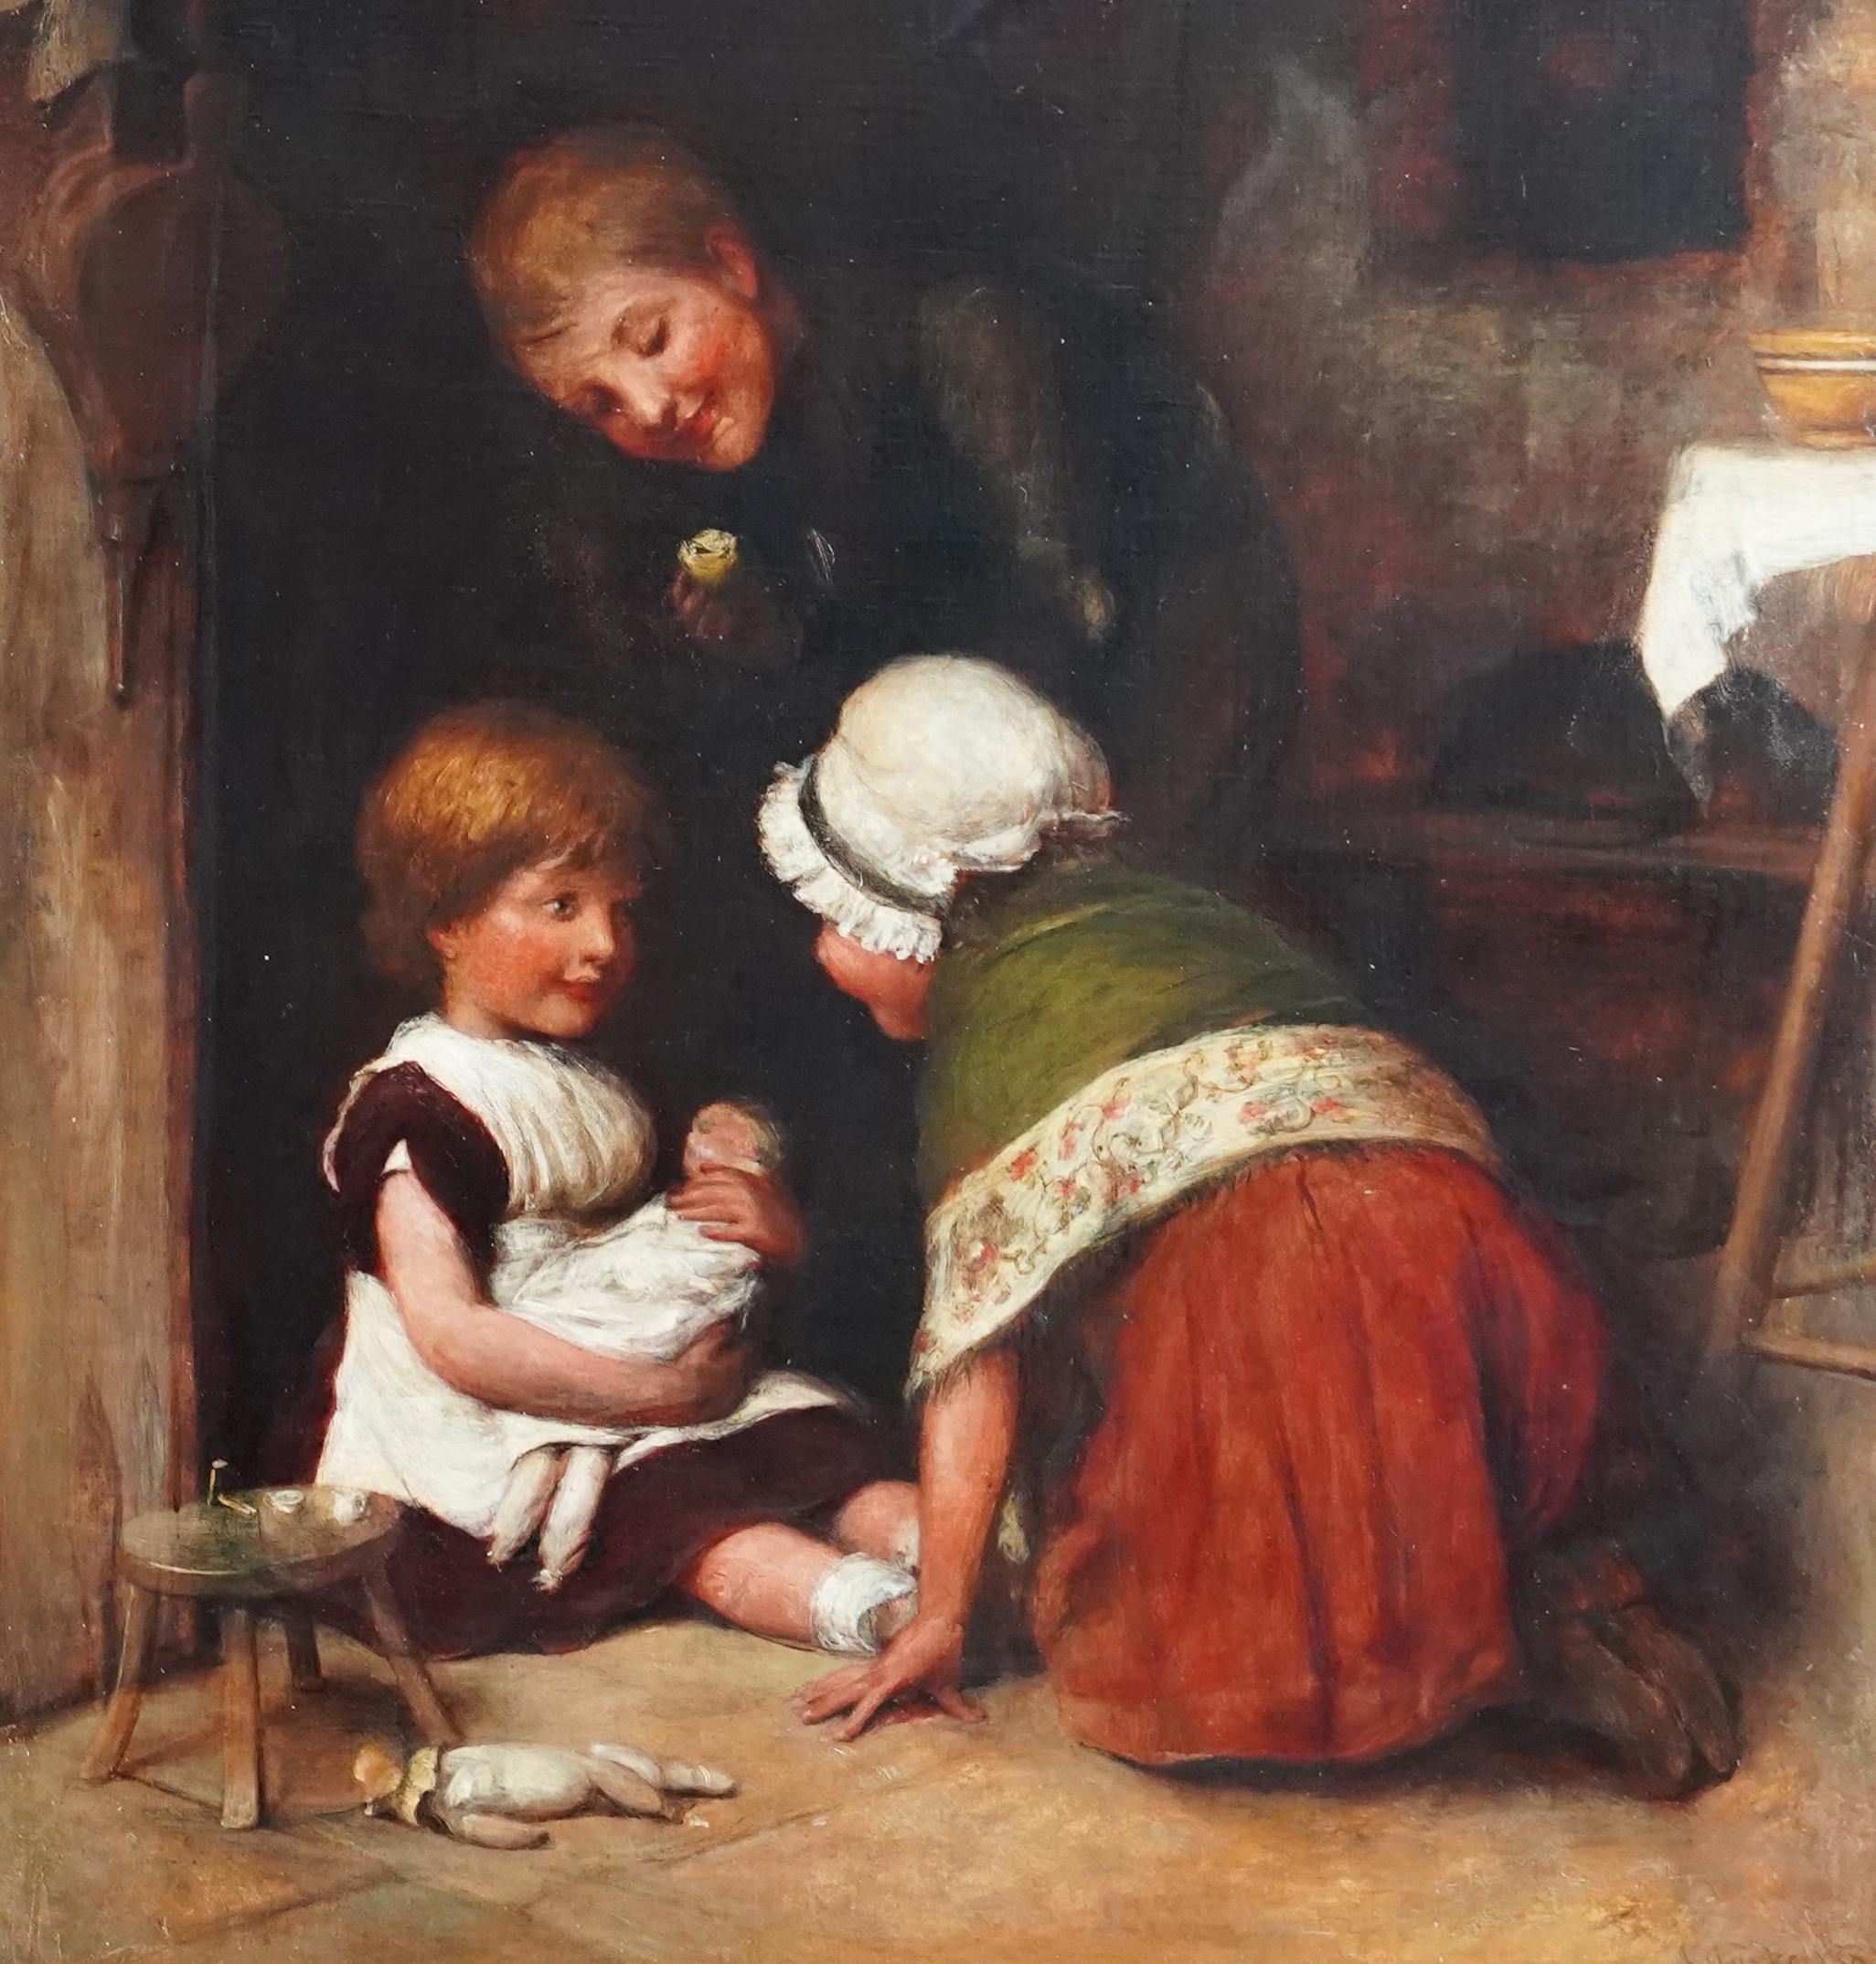 This lovely British Victorian genre oil painting is by noted artist Joseph Clark. Painted in 1881 it is a charming composition of three young children playing with a doll on the floor of a cottage by the hearth. Historically it has been entitled